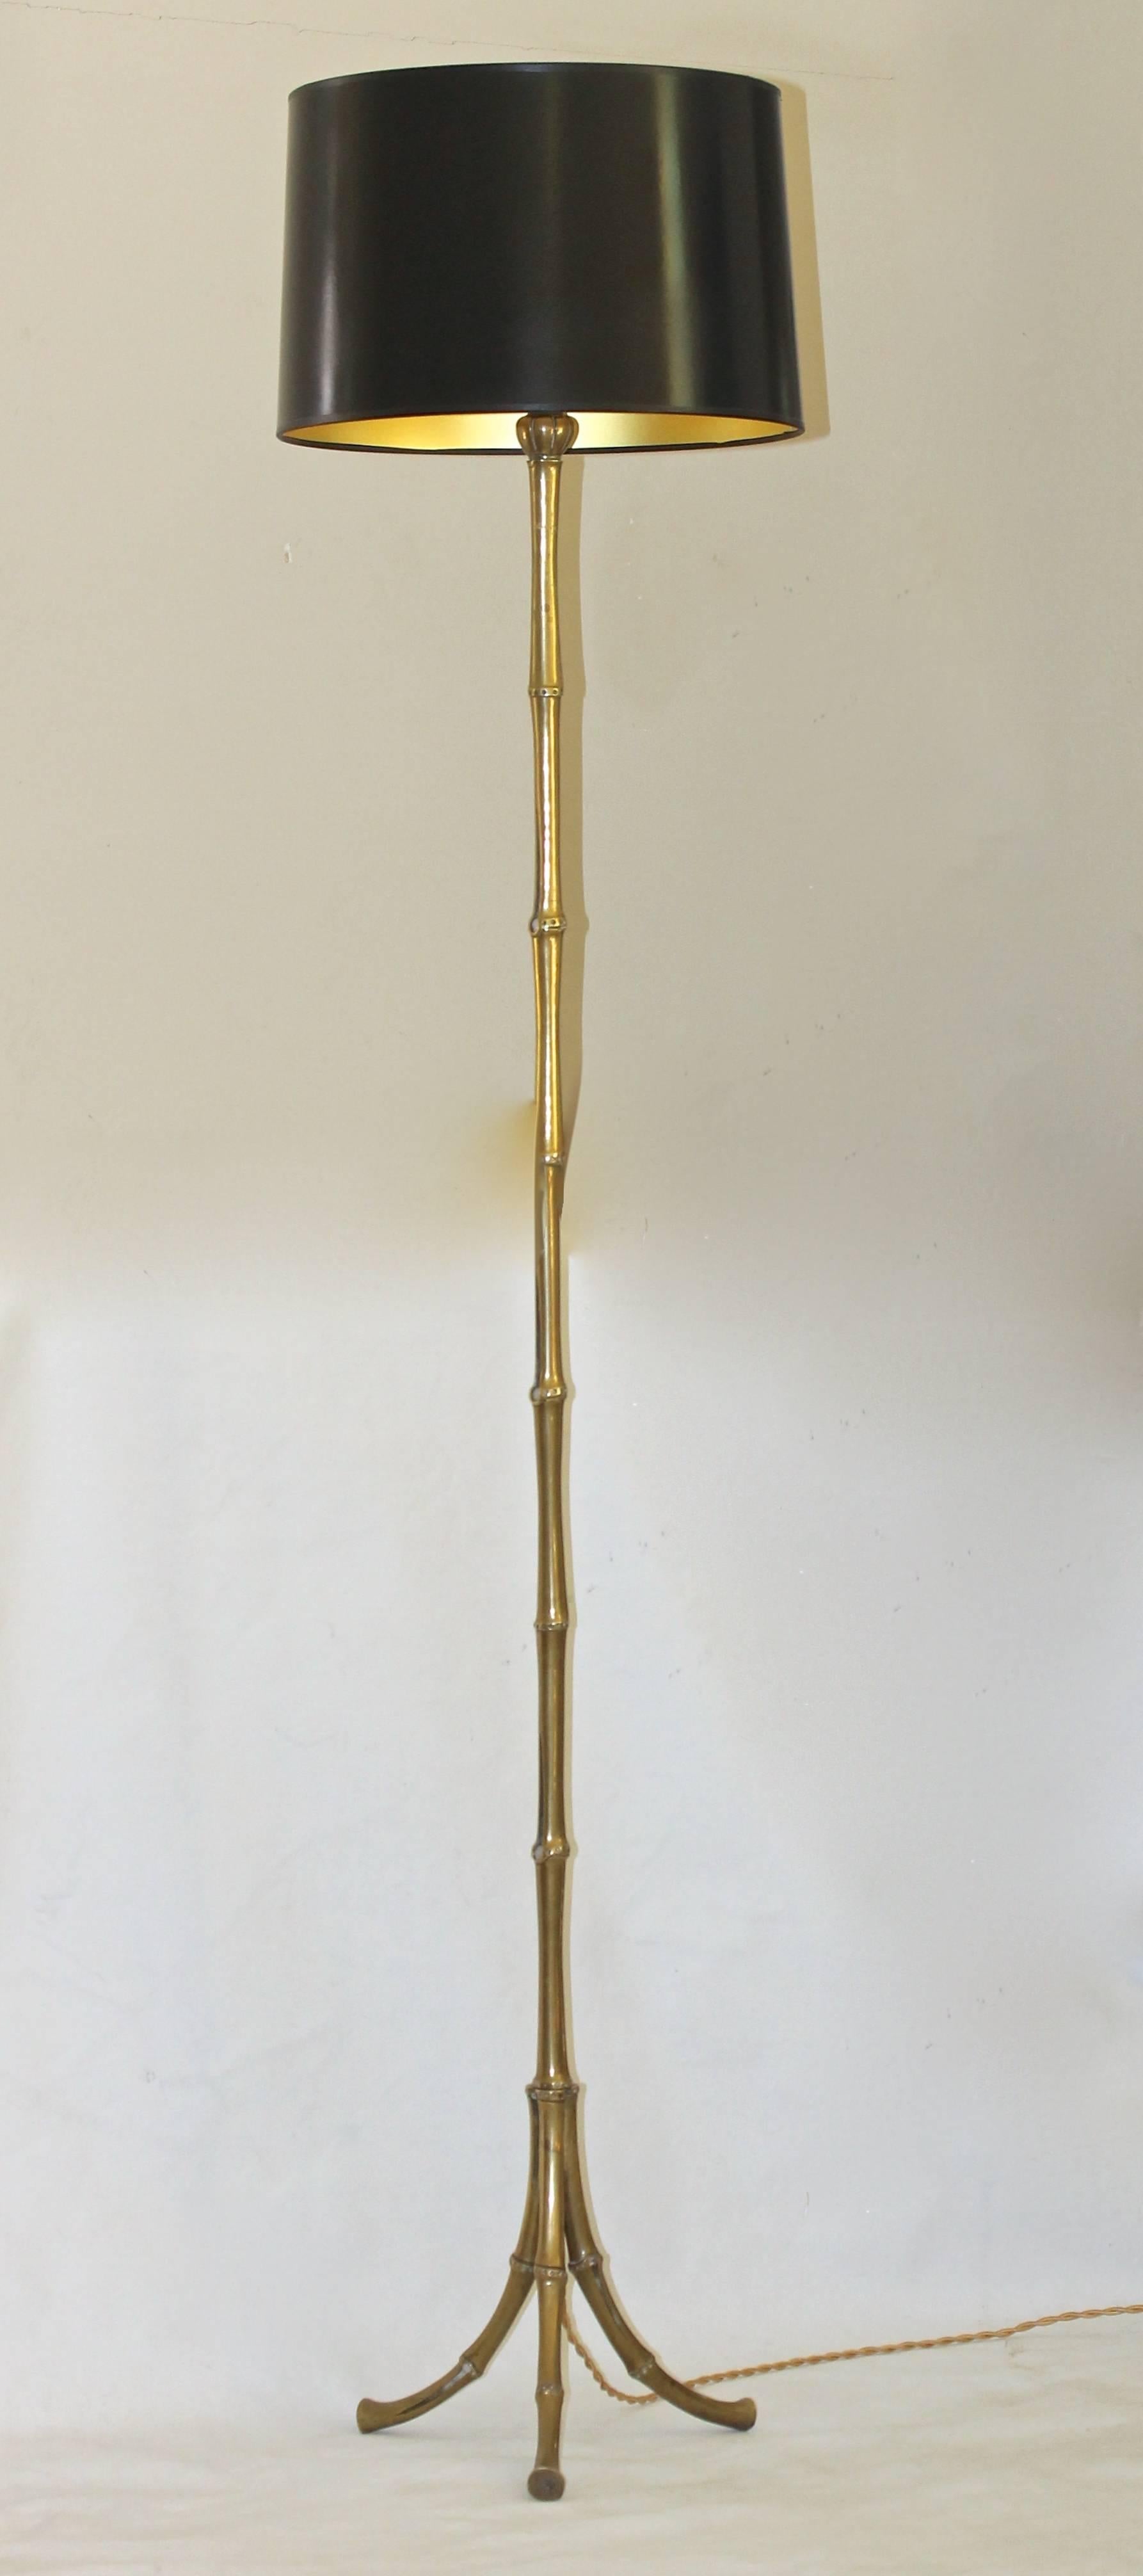 French Maison Bagues solid bronze faux bamboo floor lamp resting on tripod legs. Newly wired with a full range dimmer socket and French style rayon covered twisted cord. Uses 1 - 60 watt max 